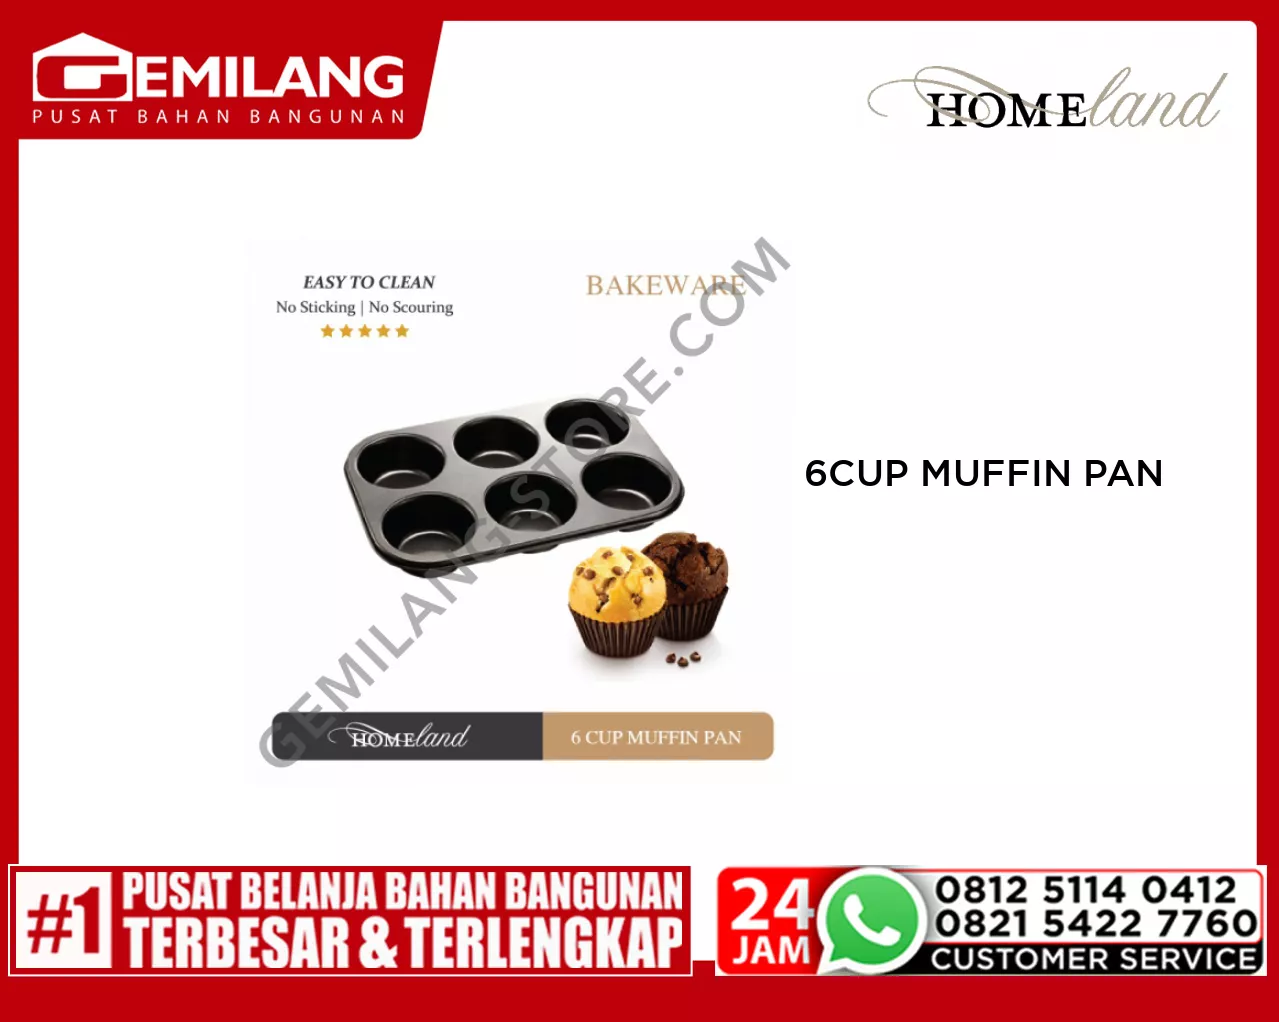 HOMELAND 6 CUP MUFFIN PAN GREY